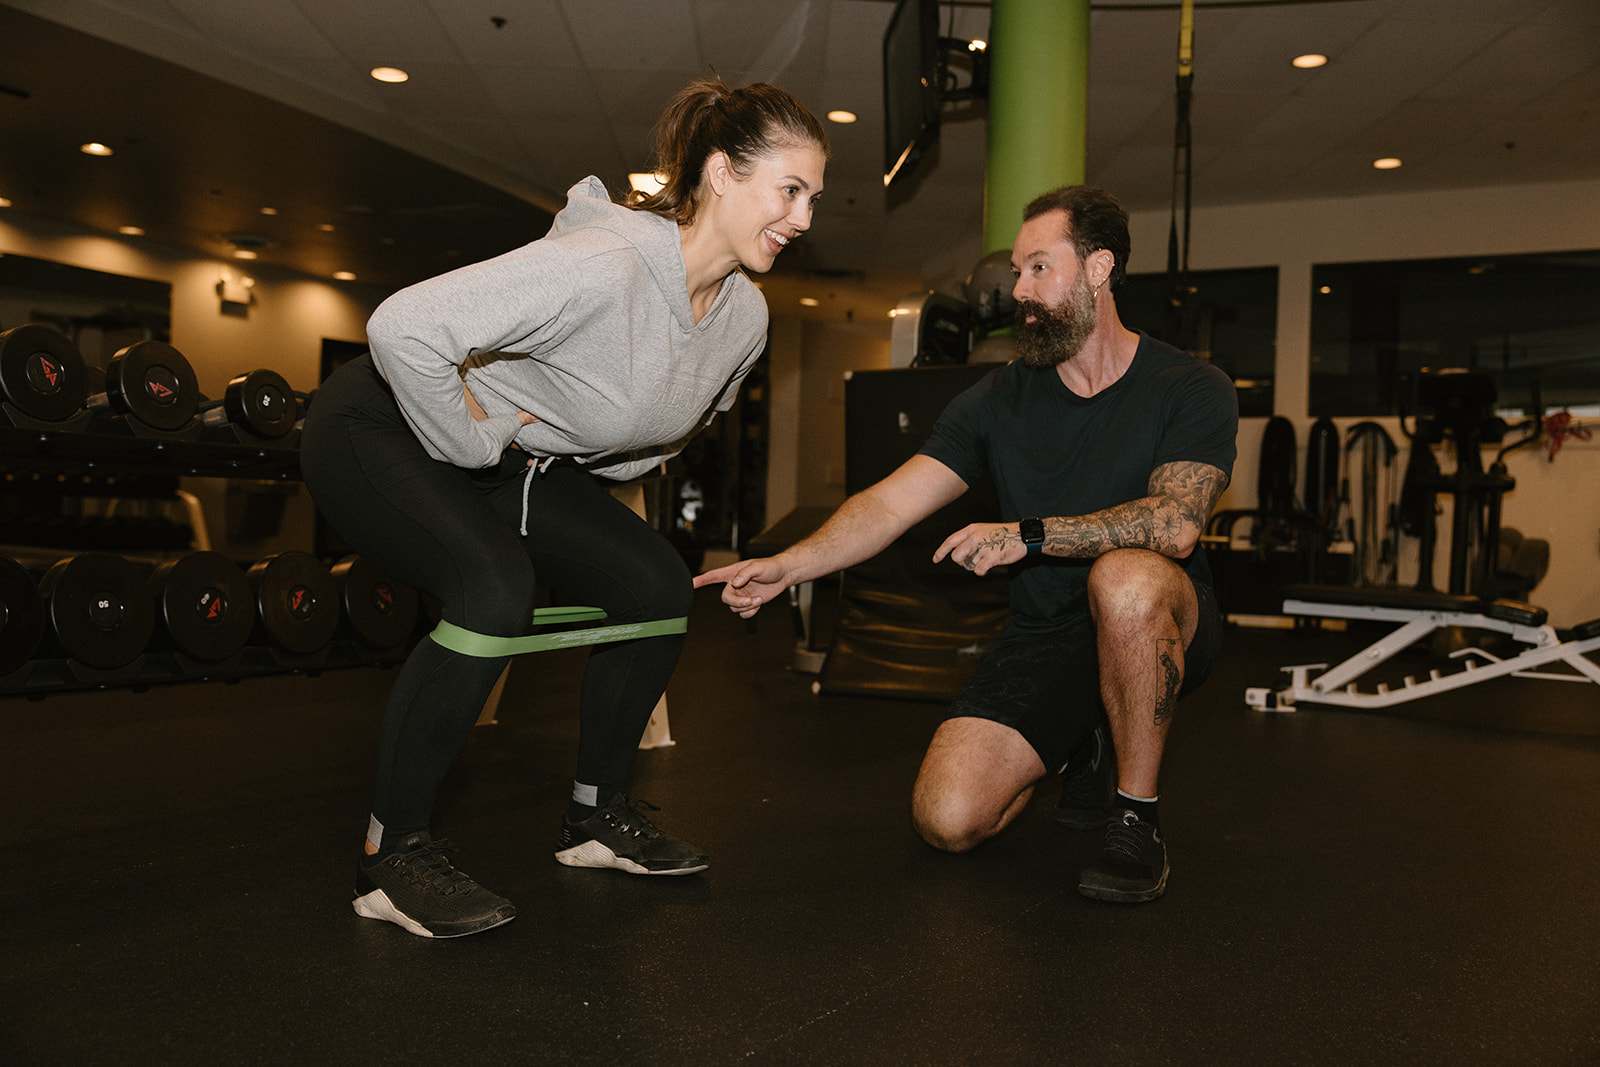 Vancouver's Top Personal Trainers and Group Fitness Instructors